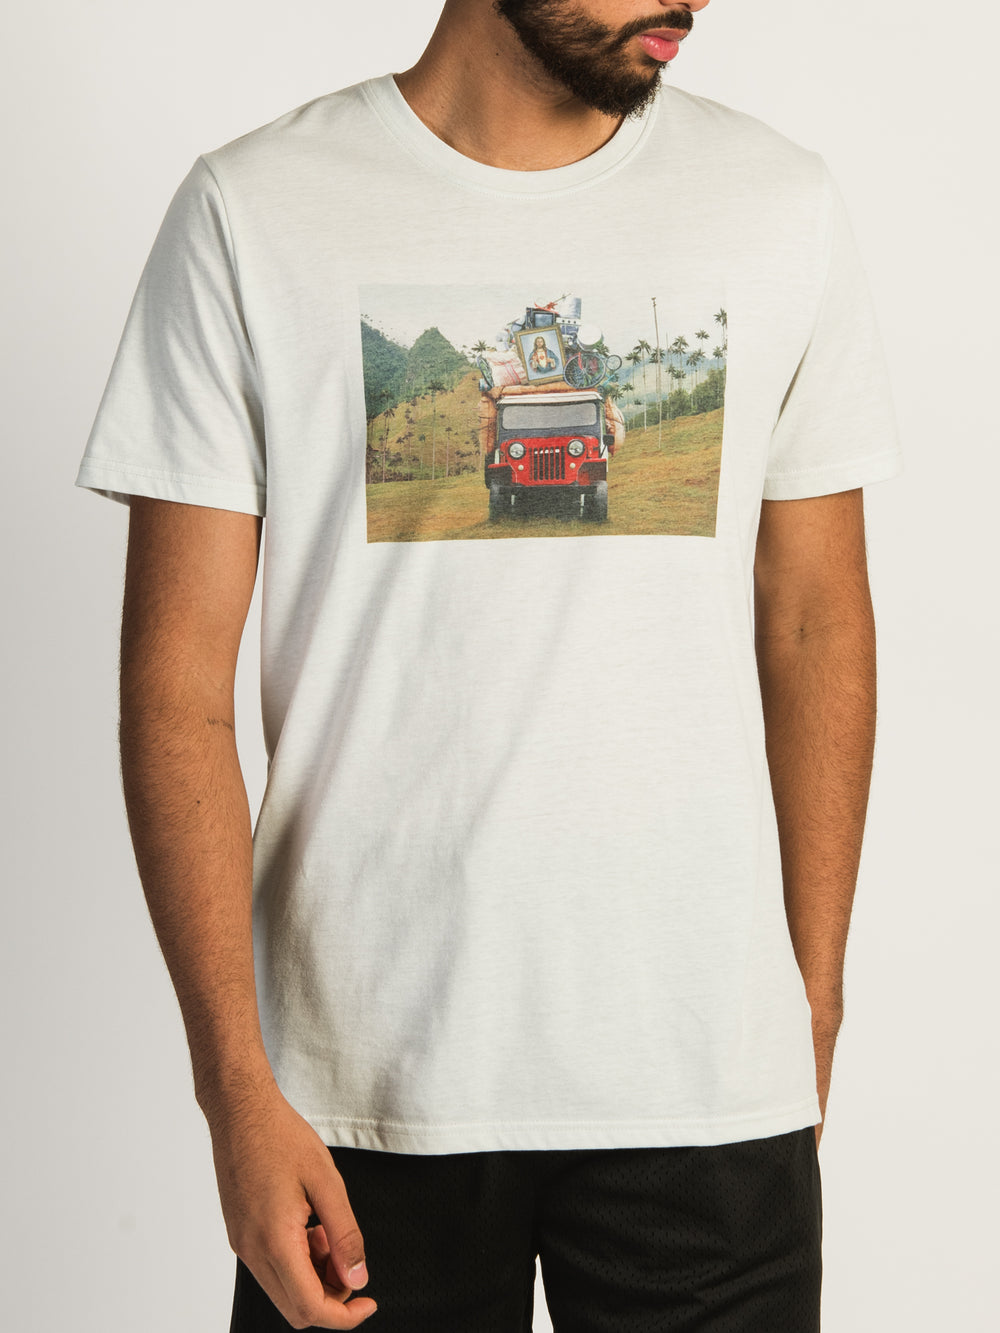 KOLBY BRYAN GRAPHIC TEE - PACKED JEEP